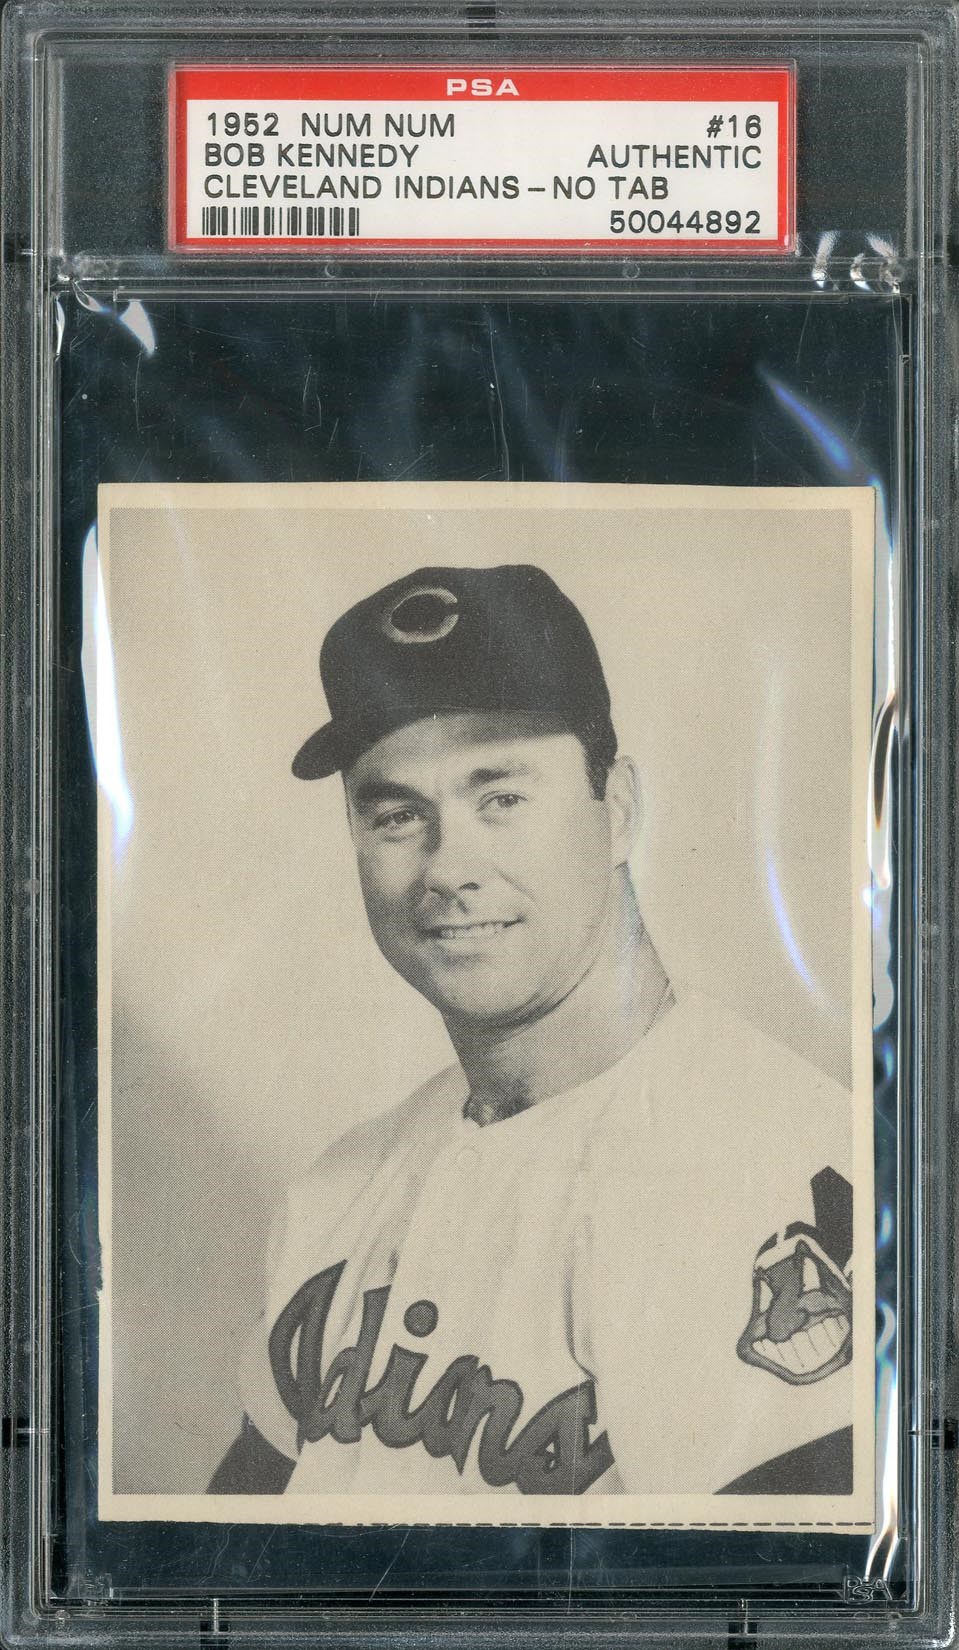 Baseball and Trading Cards - 1952 Num Num Cleveland Indians Complete Set with Rare Bob Kennedy - PSA and SGC